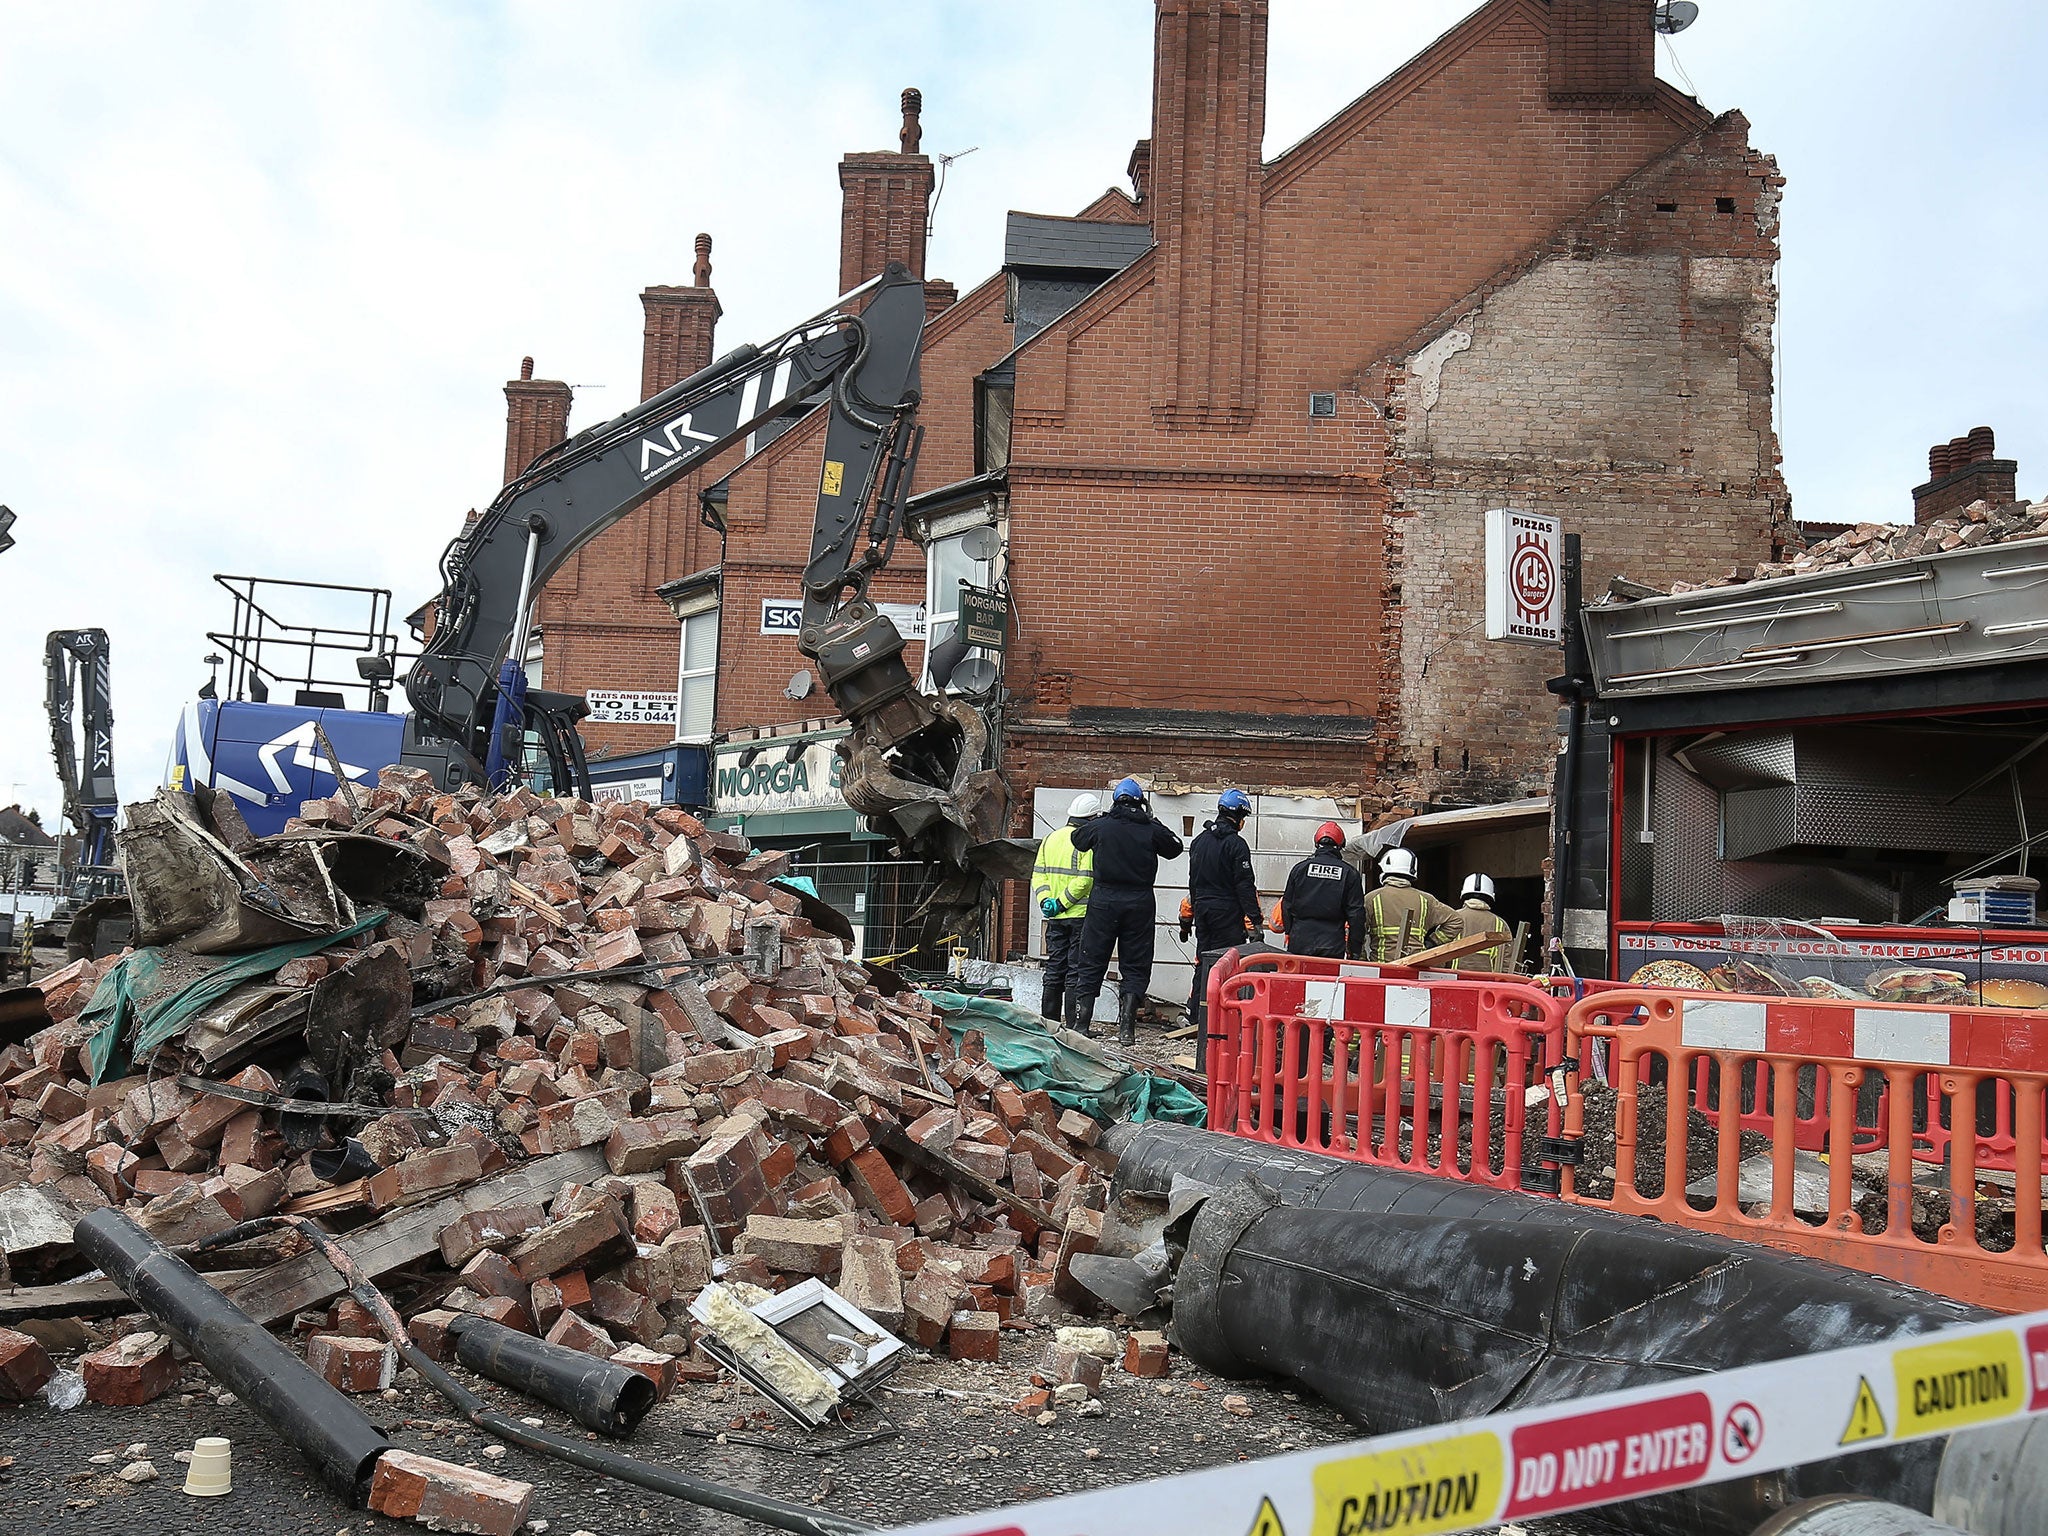 Kurd’s shop in Leicester was destroyed in the explosion caused by the group